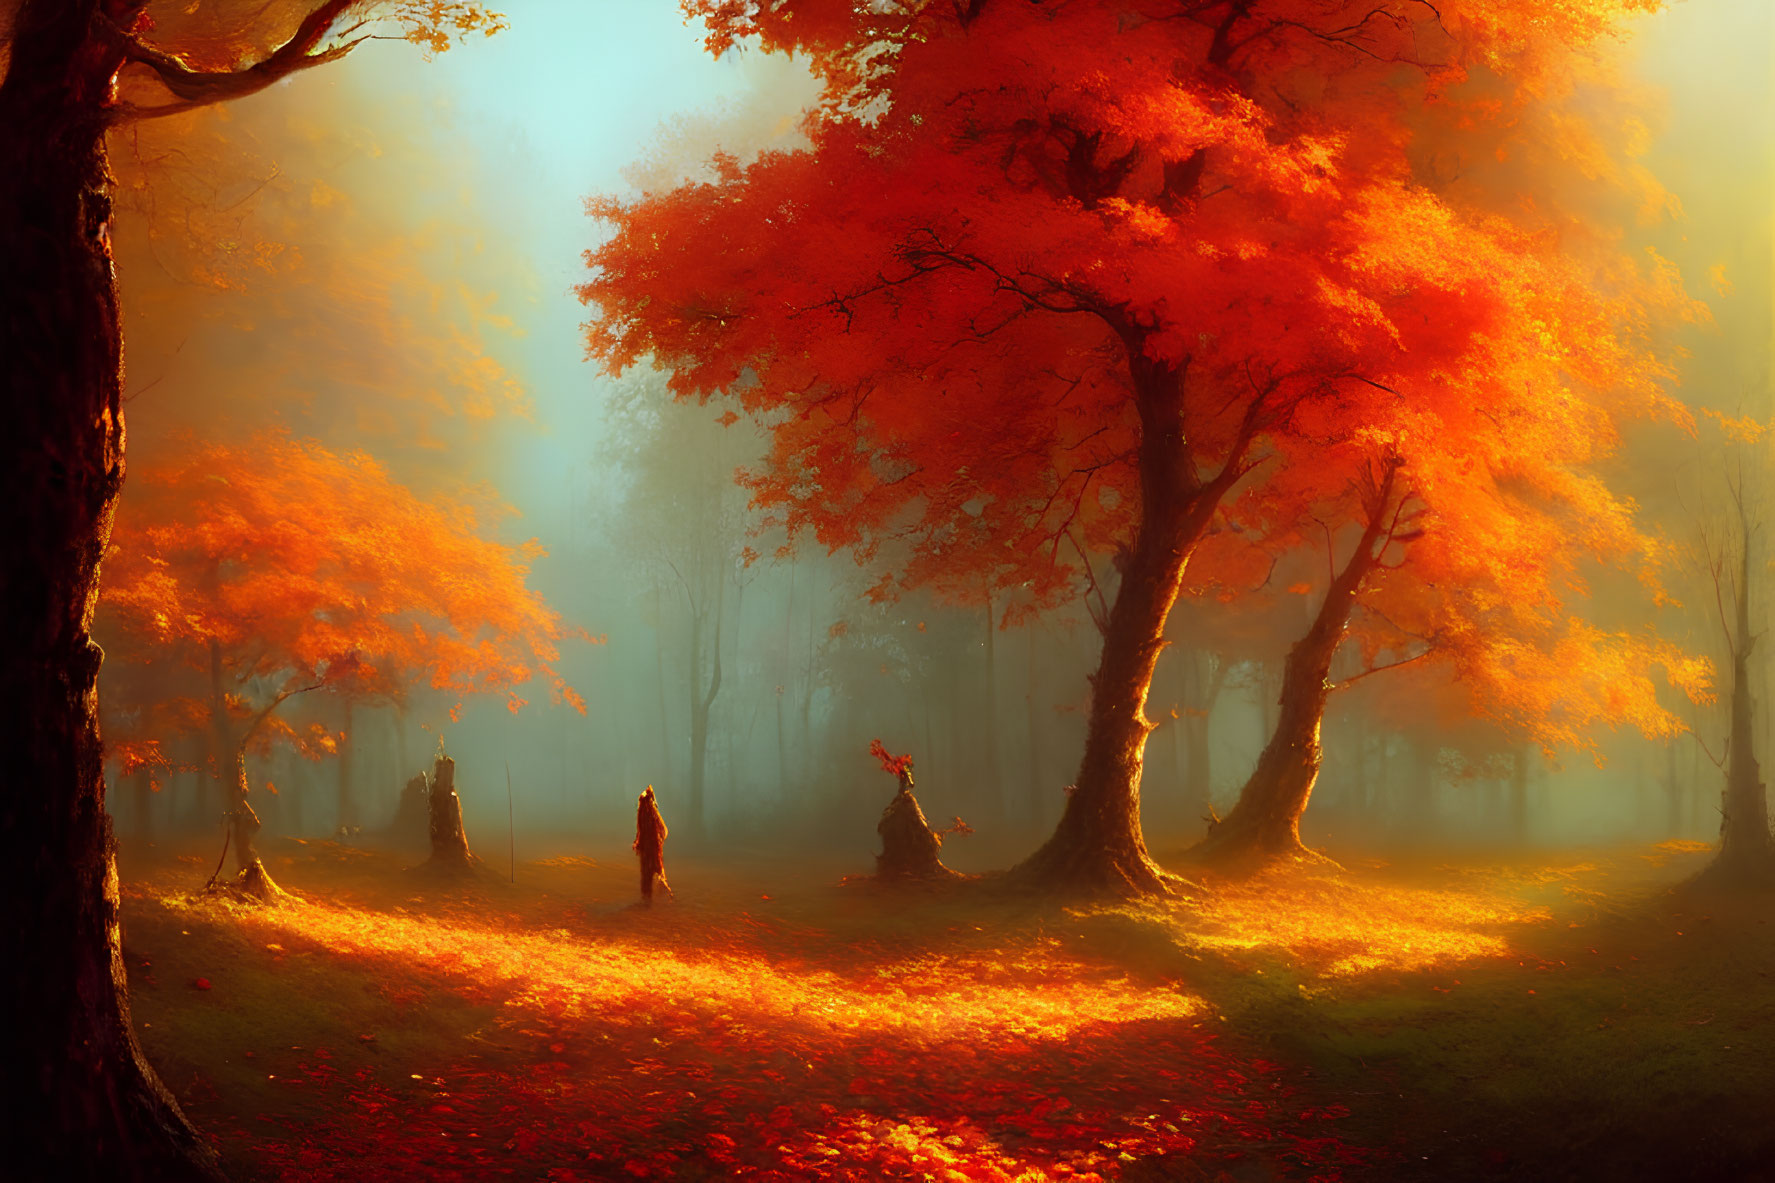 Vibrant autumn forest with orange foliage and wandering figures